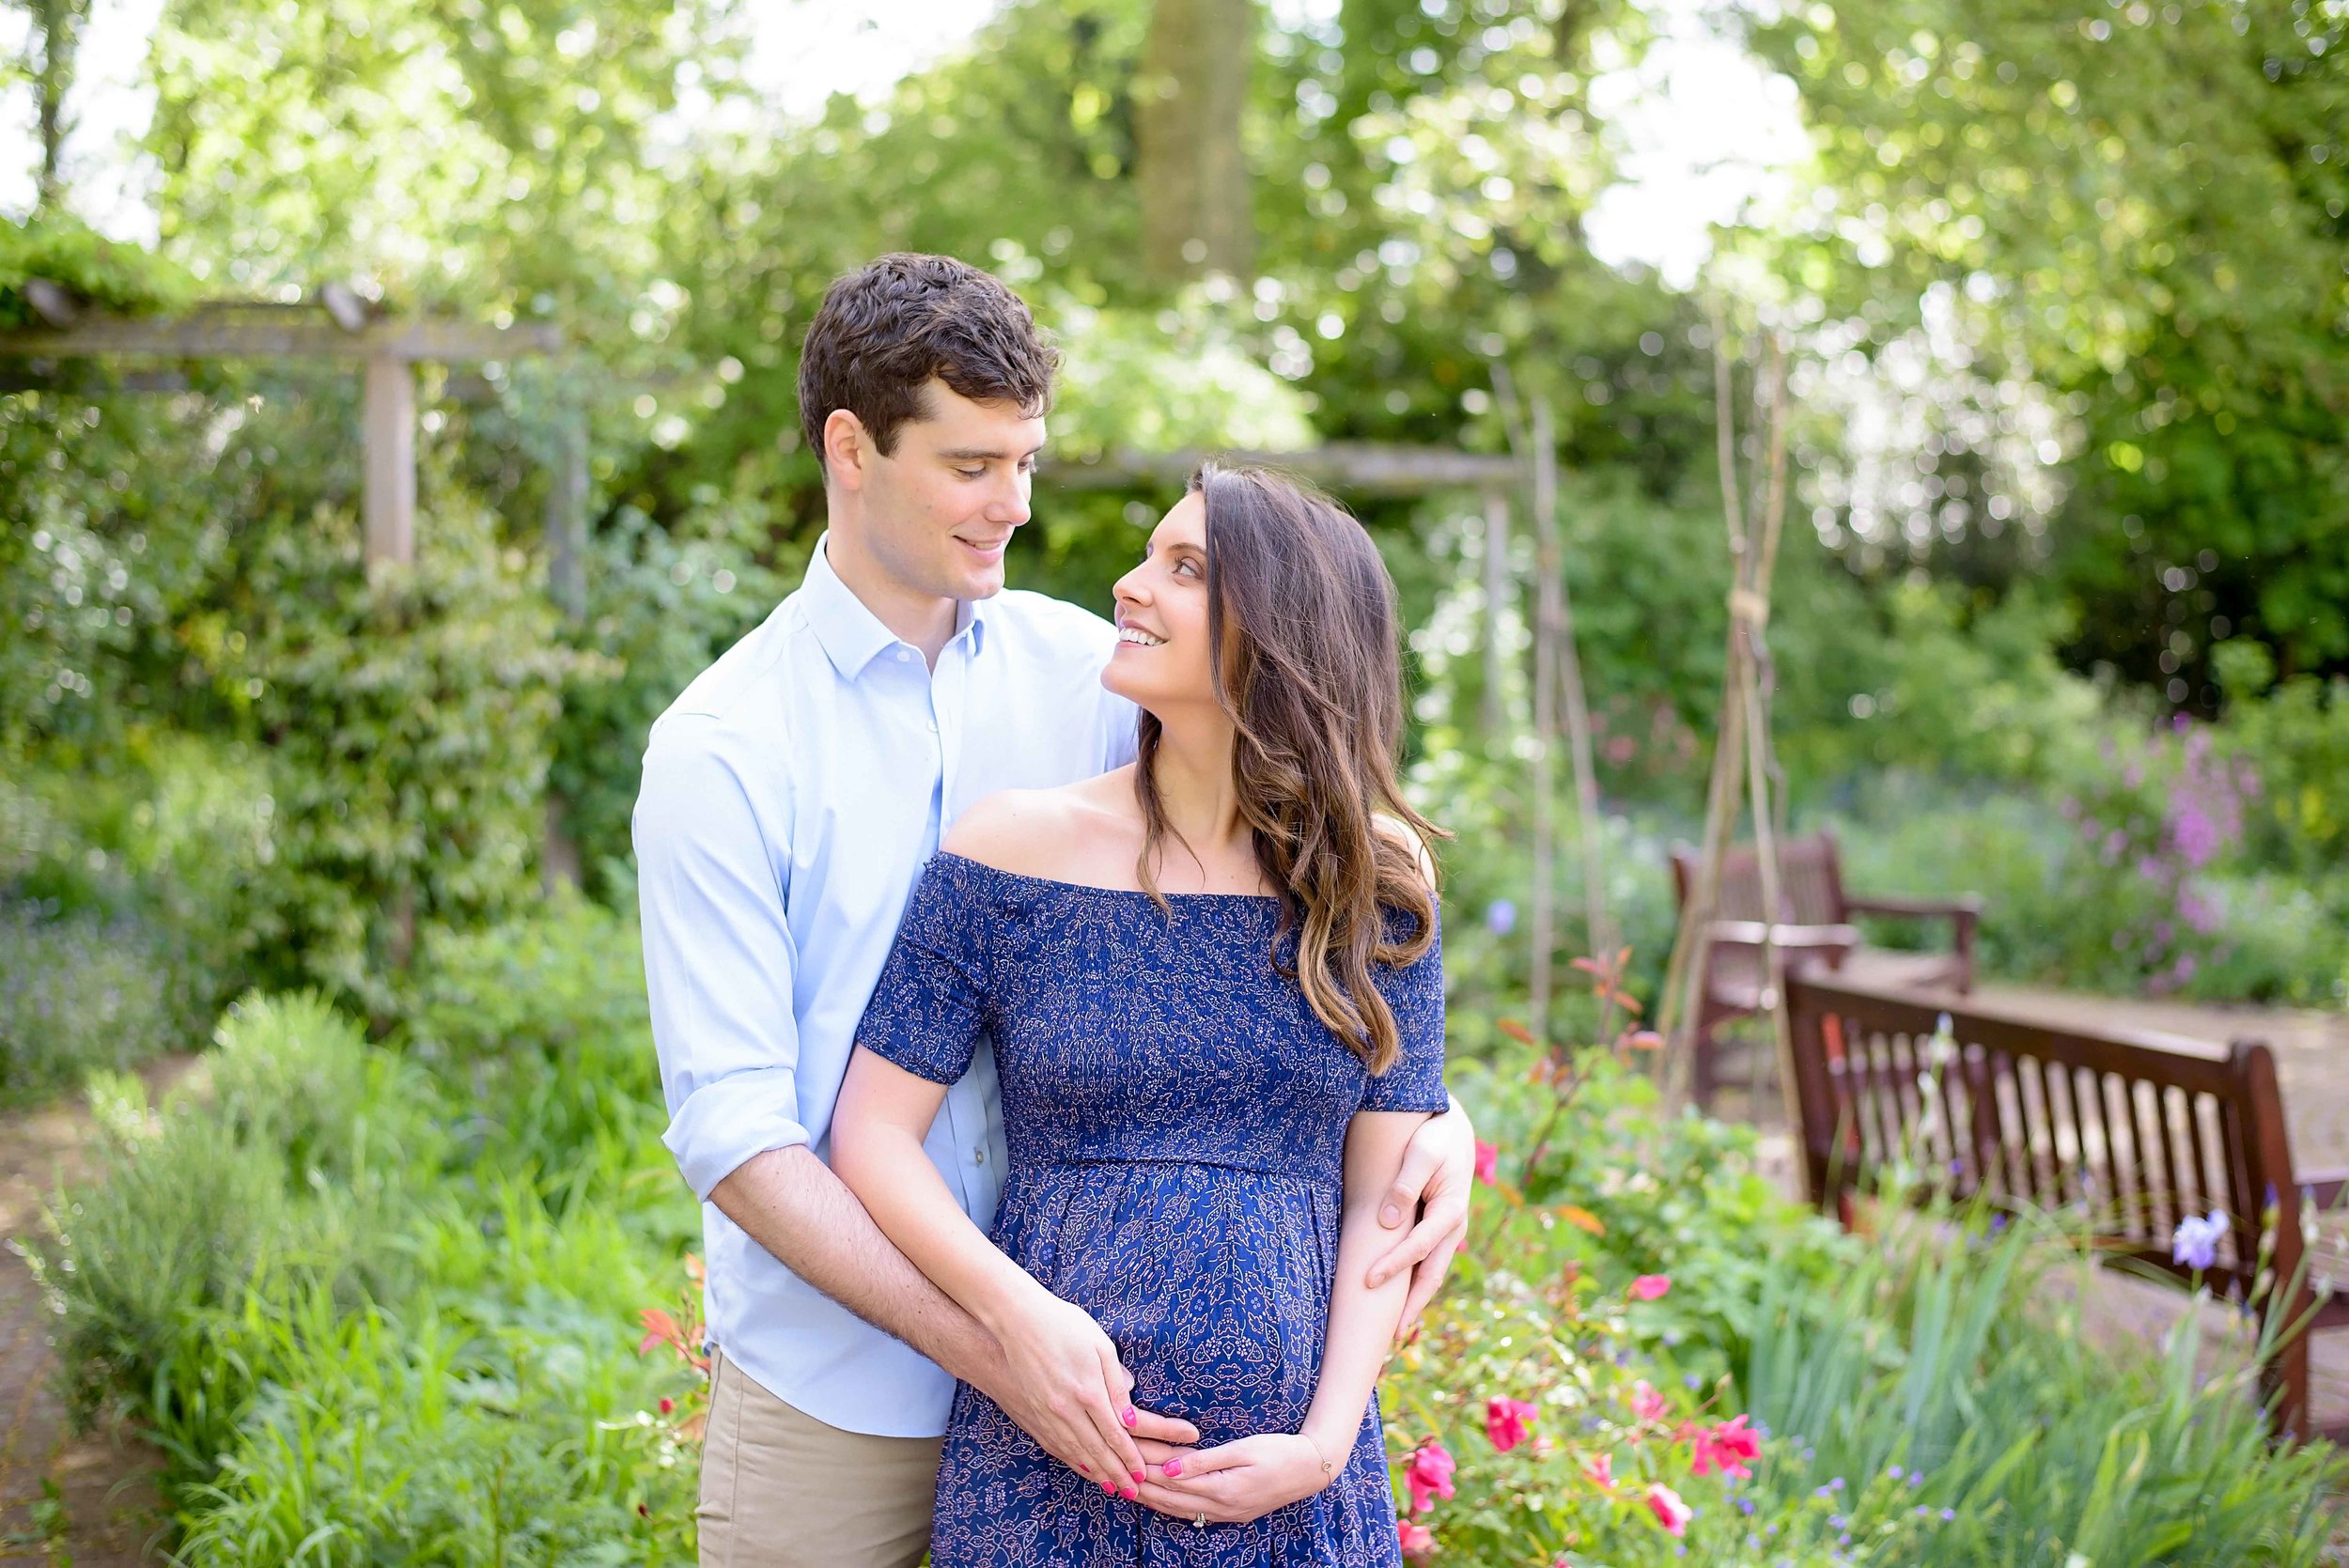 Contemporary pregnancy photography UK